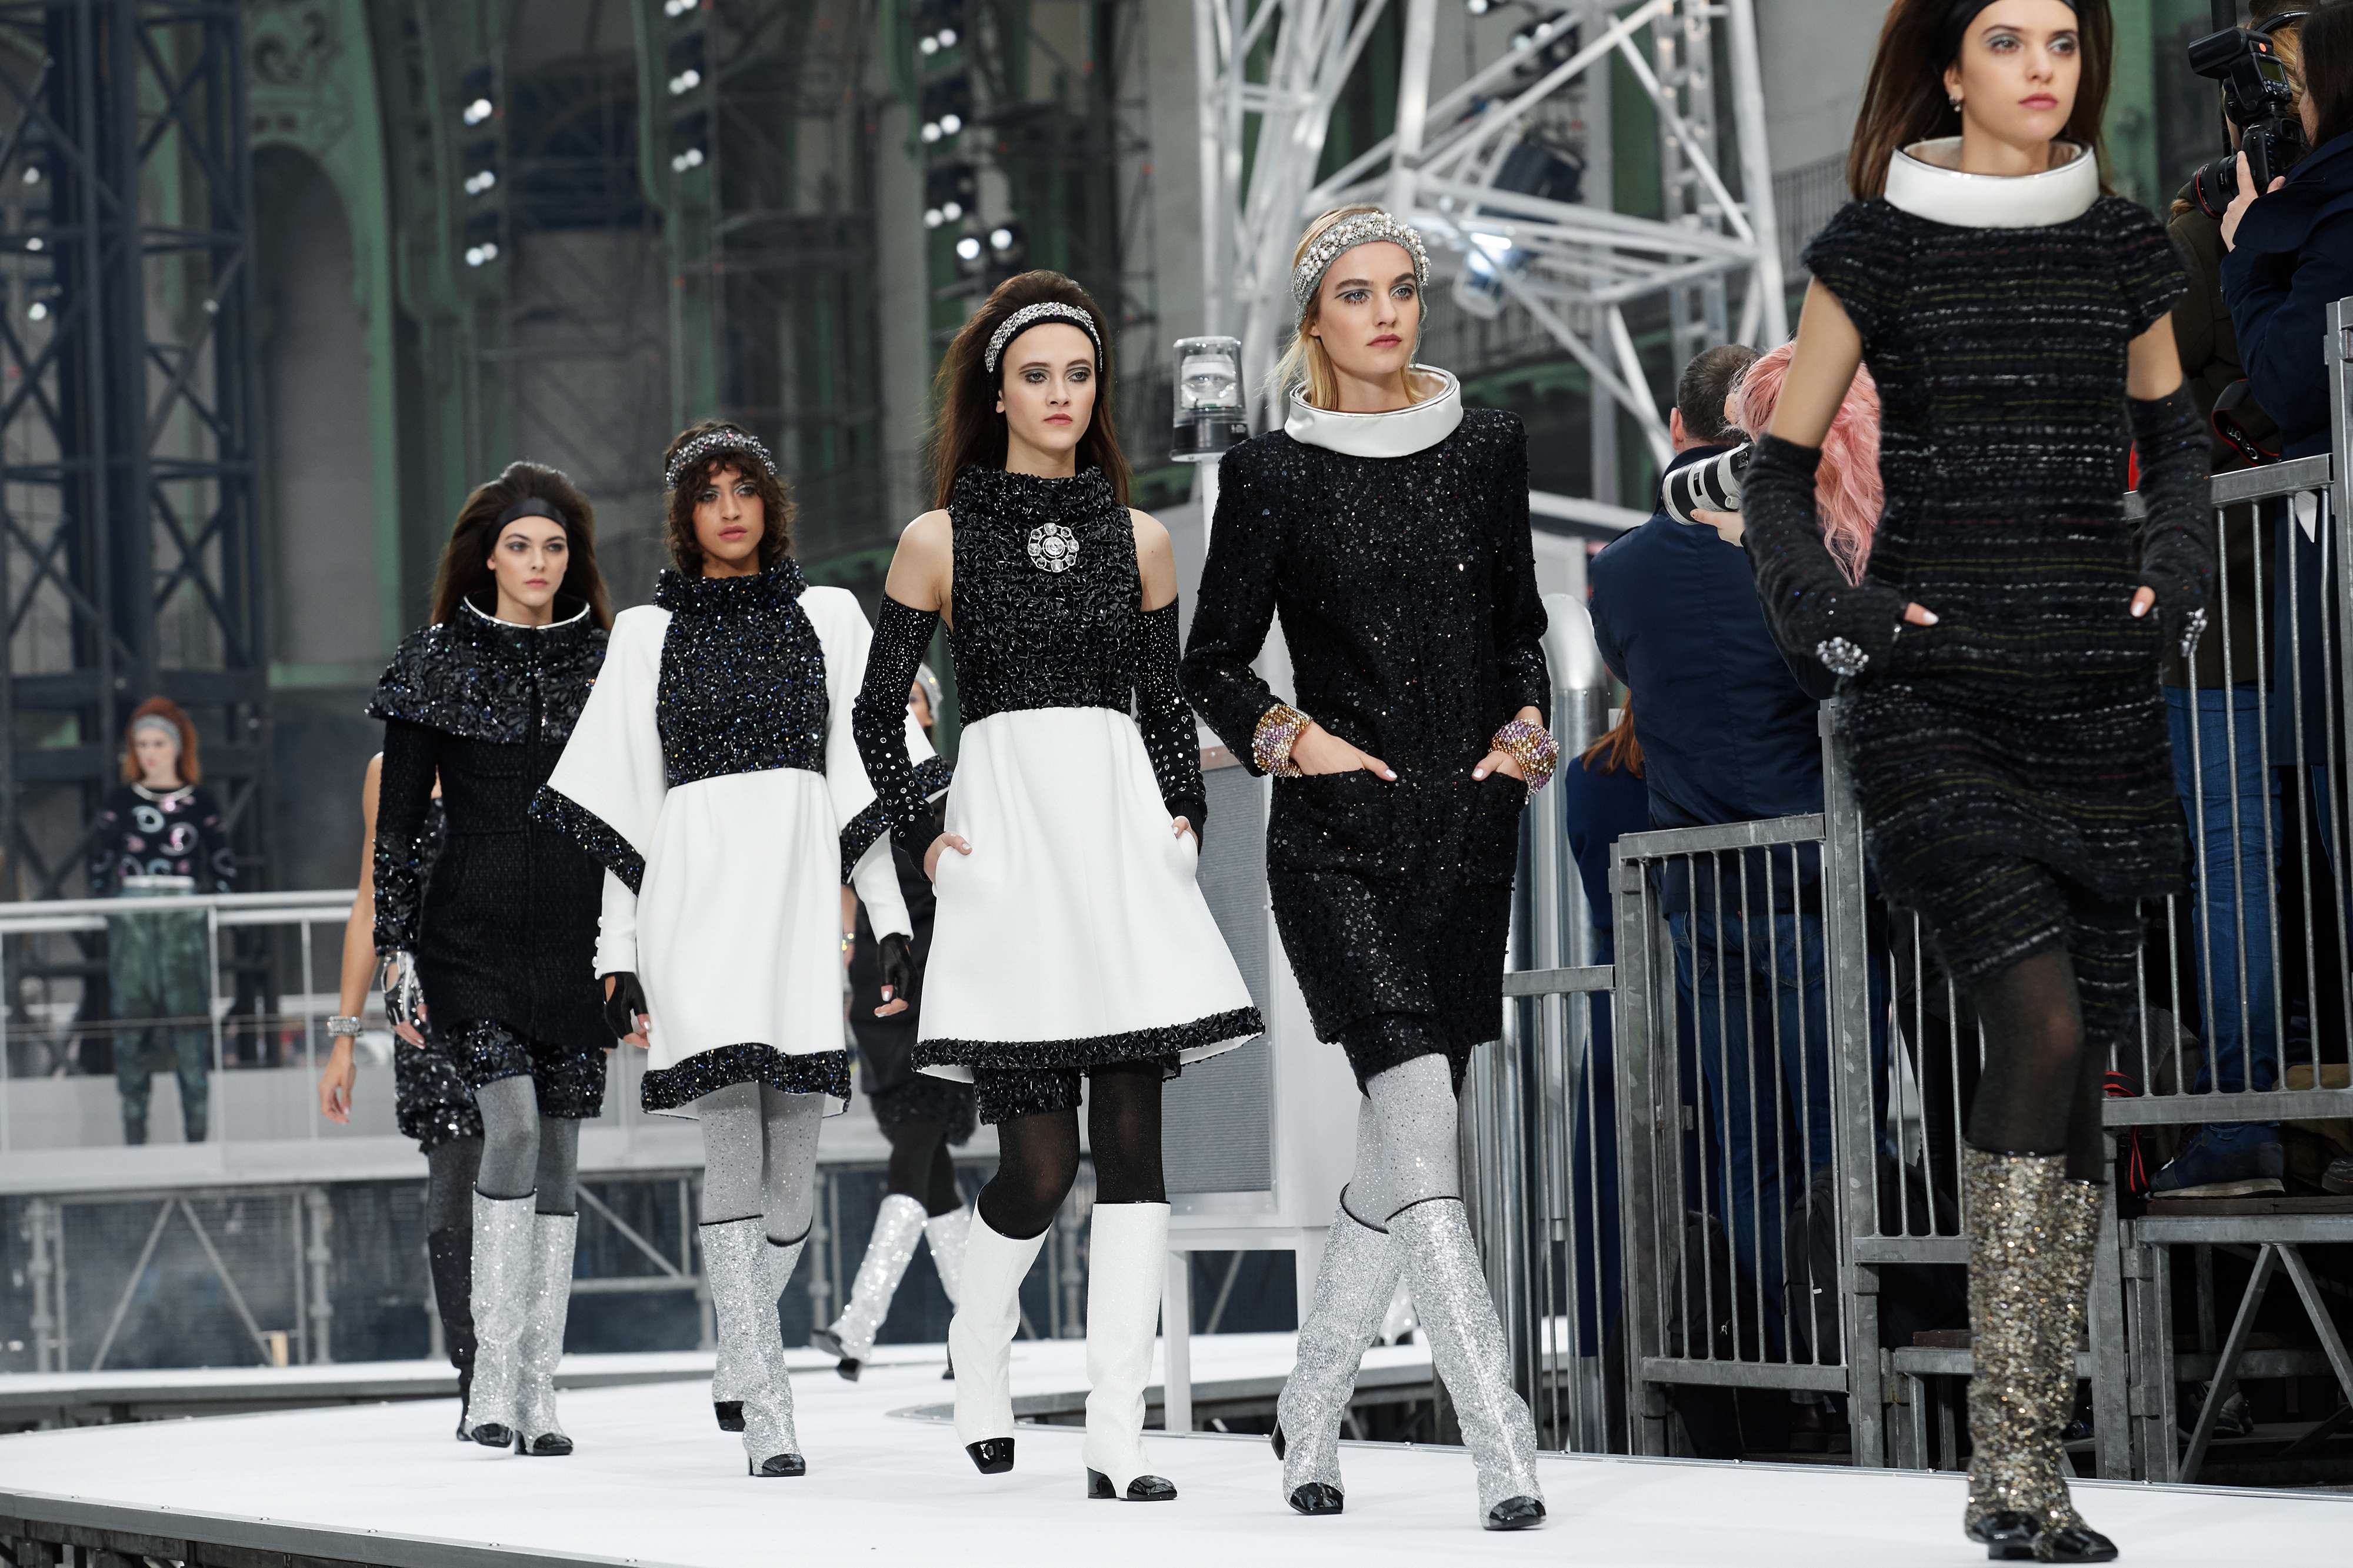 Chanel rockets to space in Paris, Rihanna's back to school